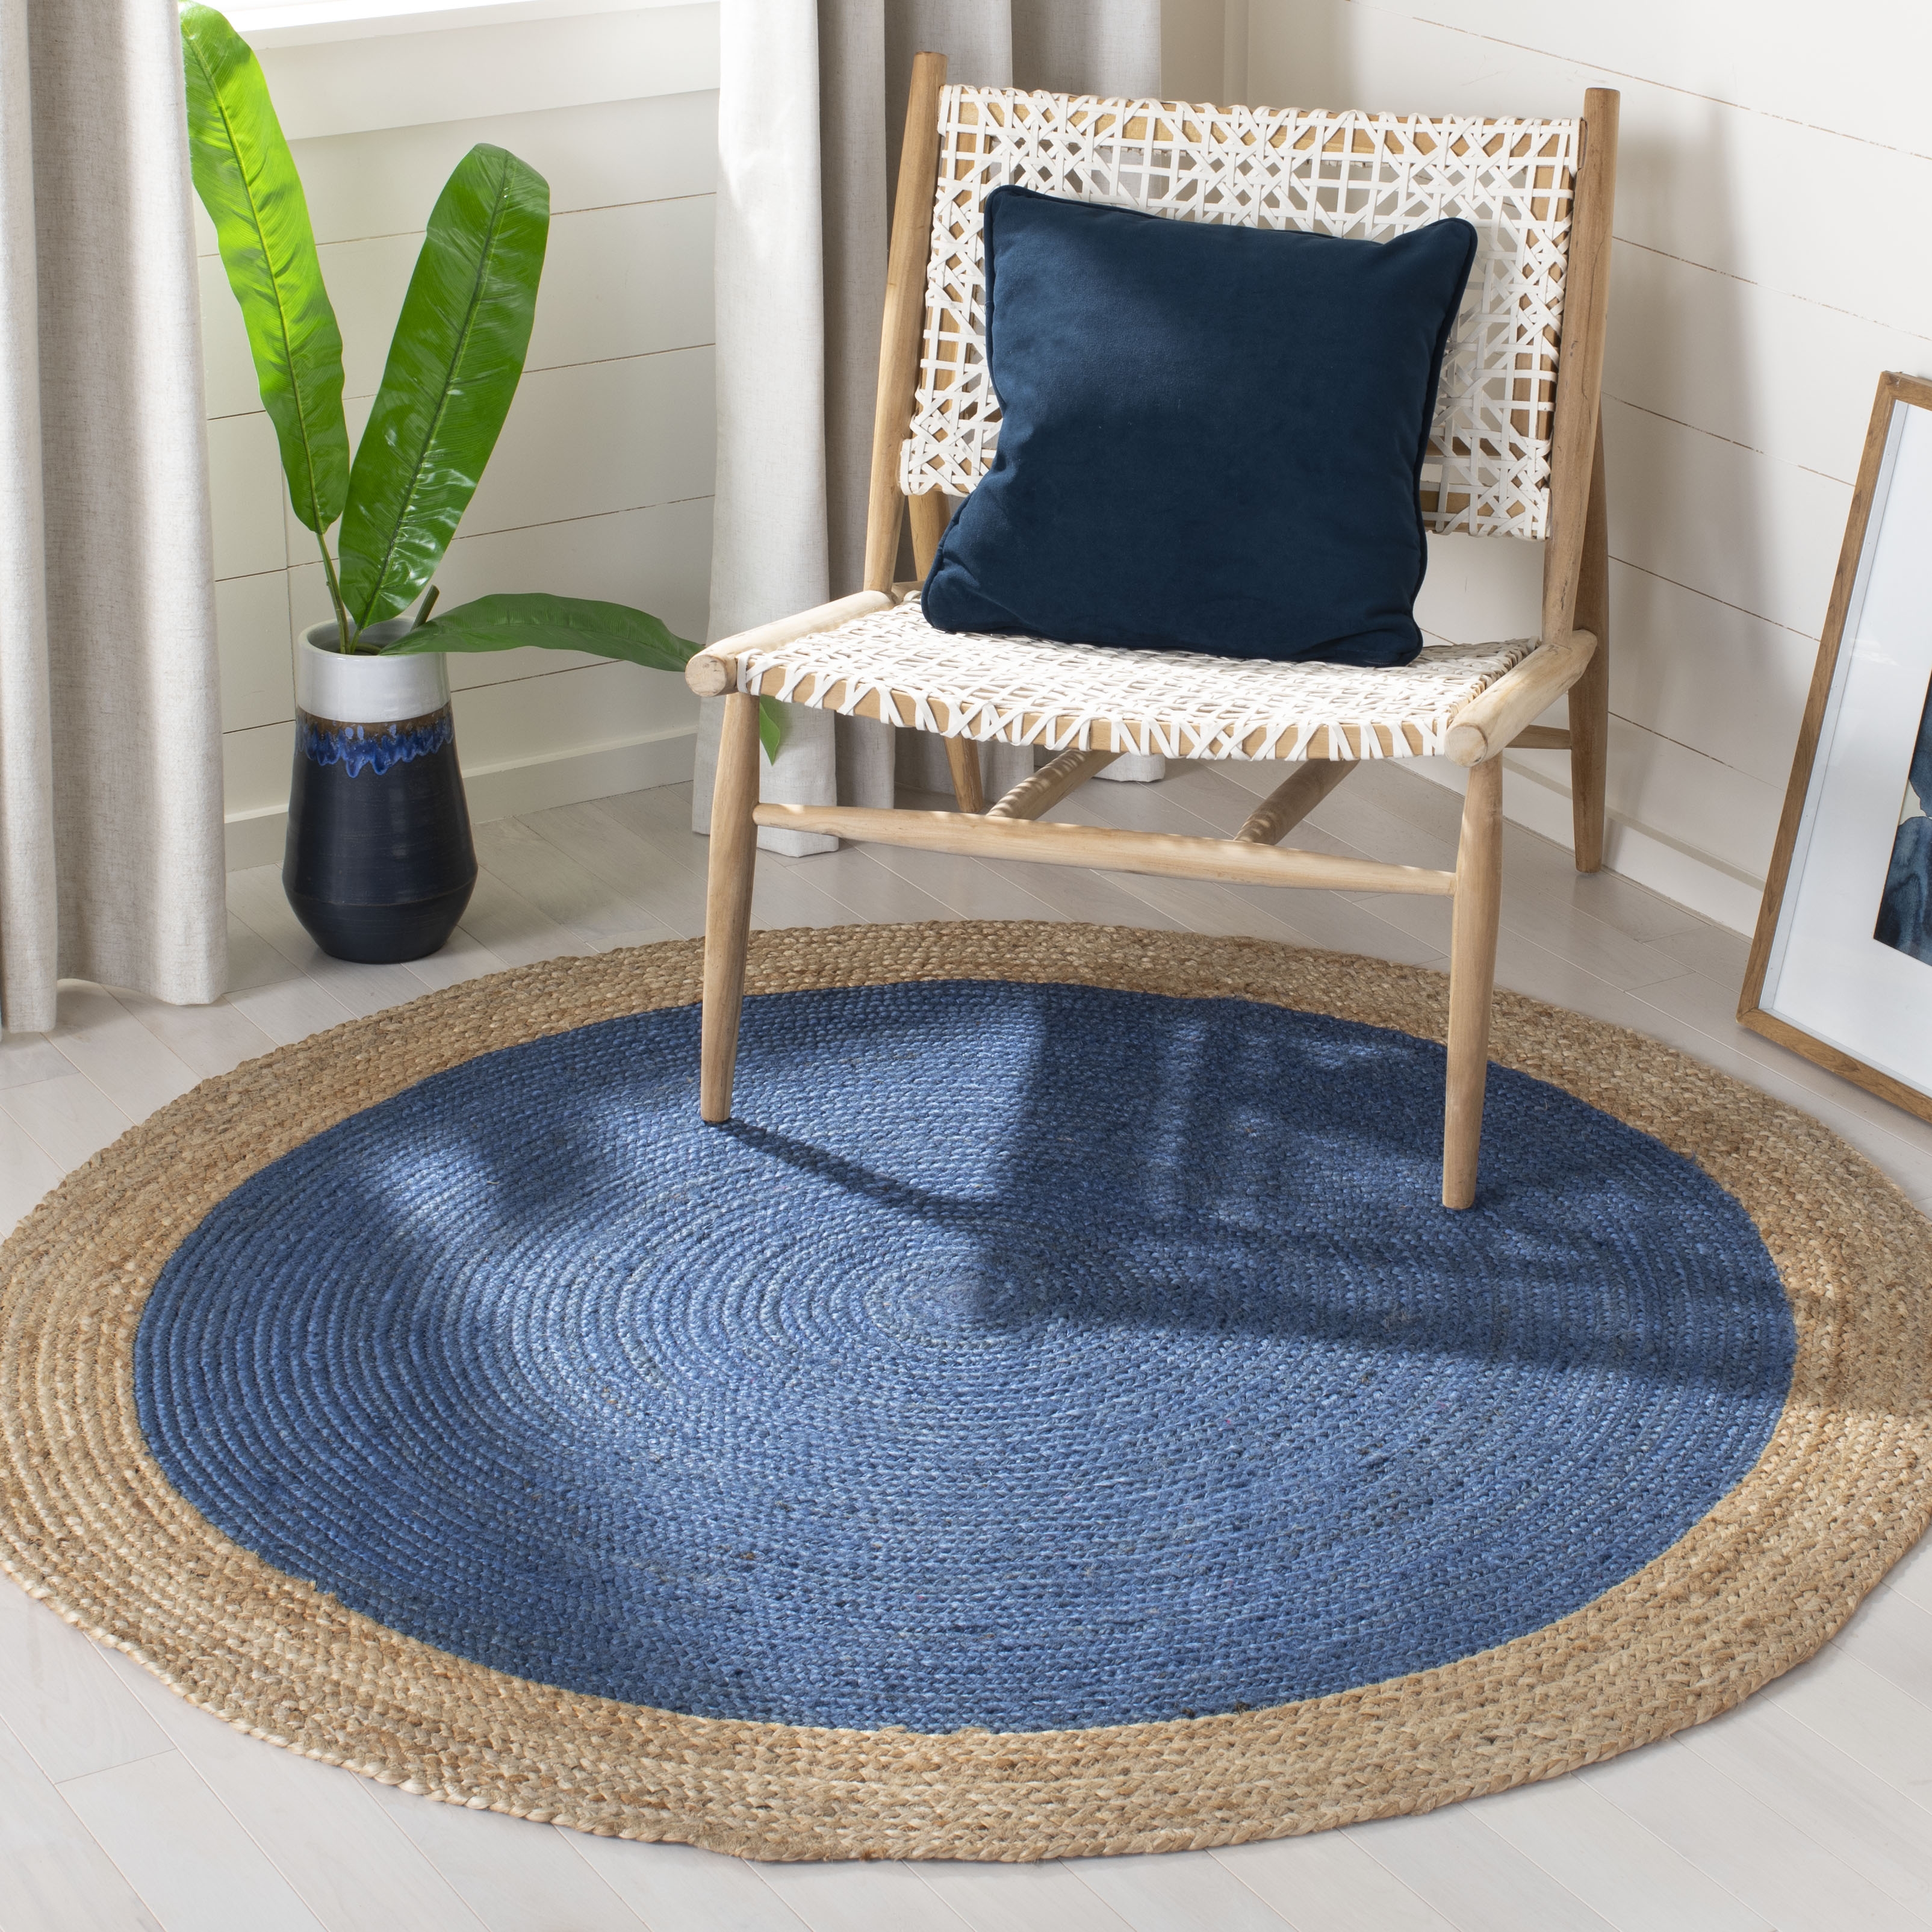 Arlo Home Hand Woven Area Rug, NF801D, Royal Blue/Natural,  8' X 8' Round - Image 1